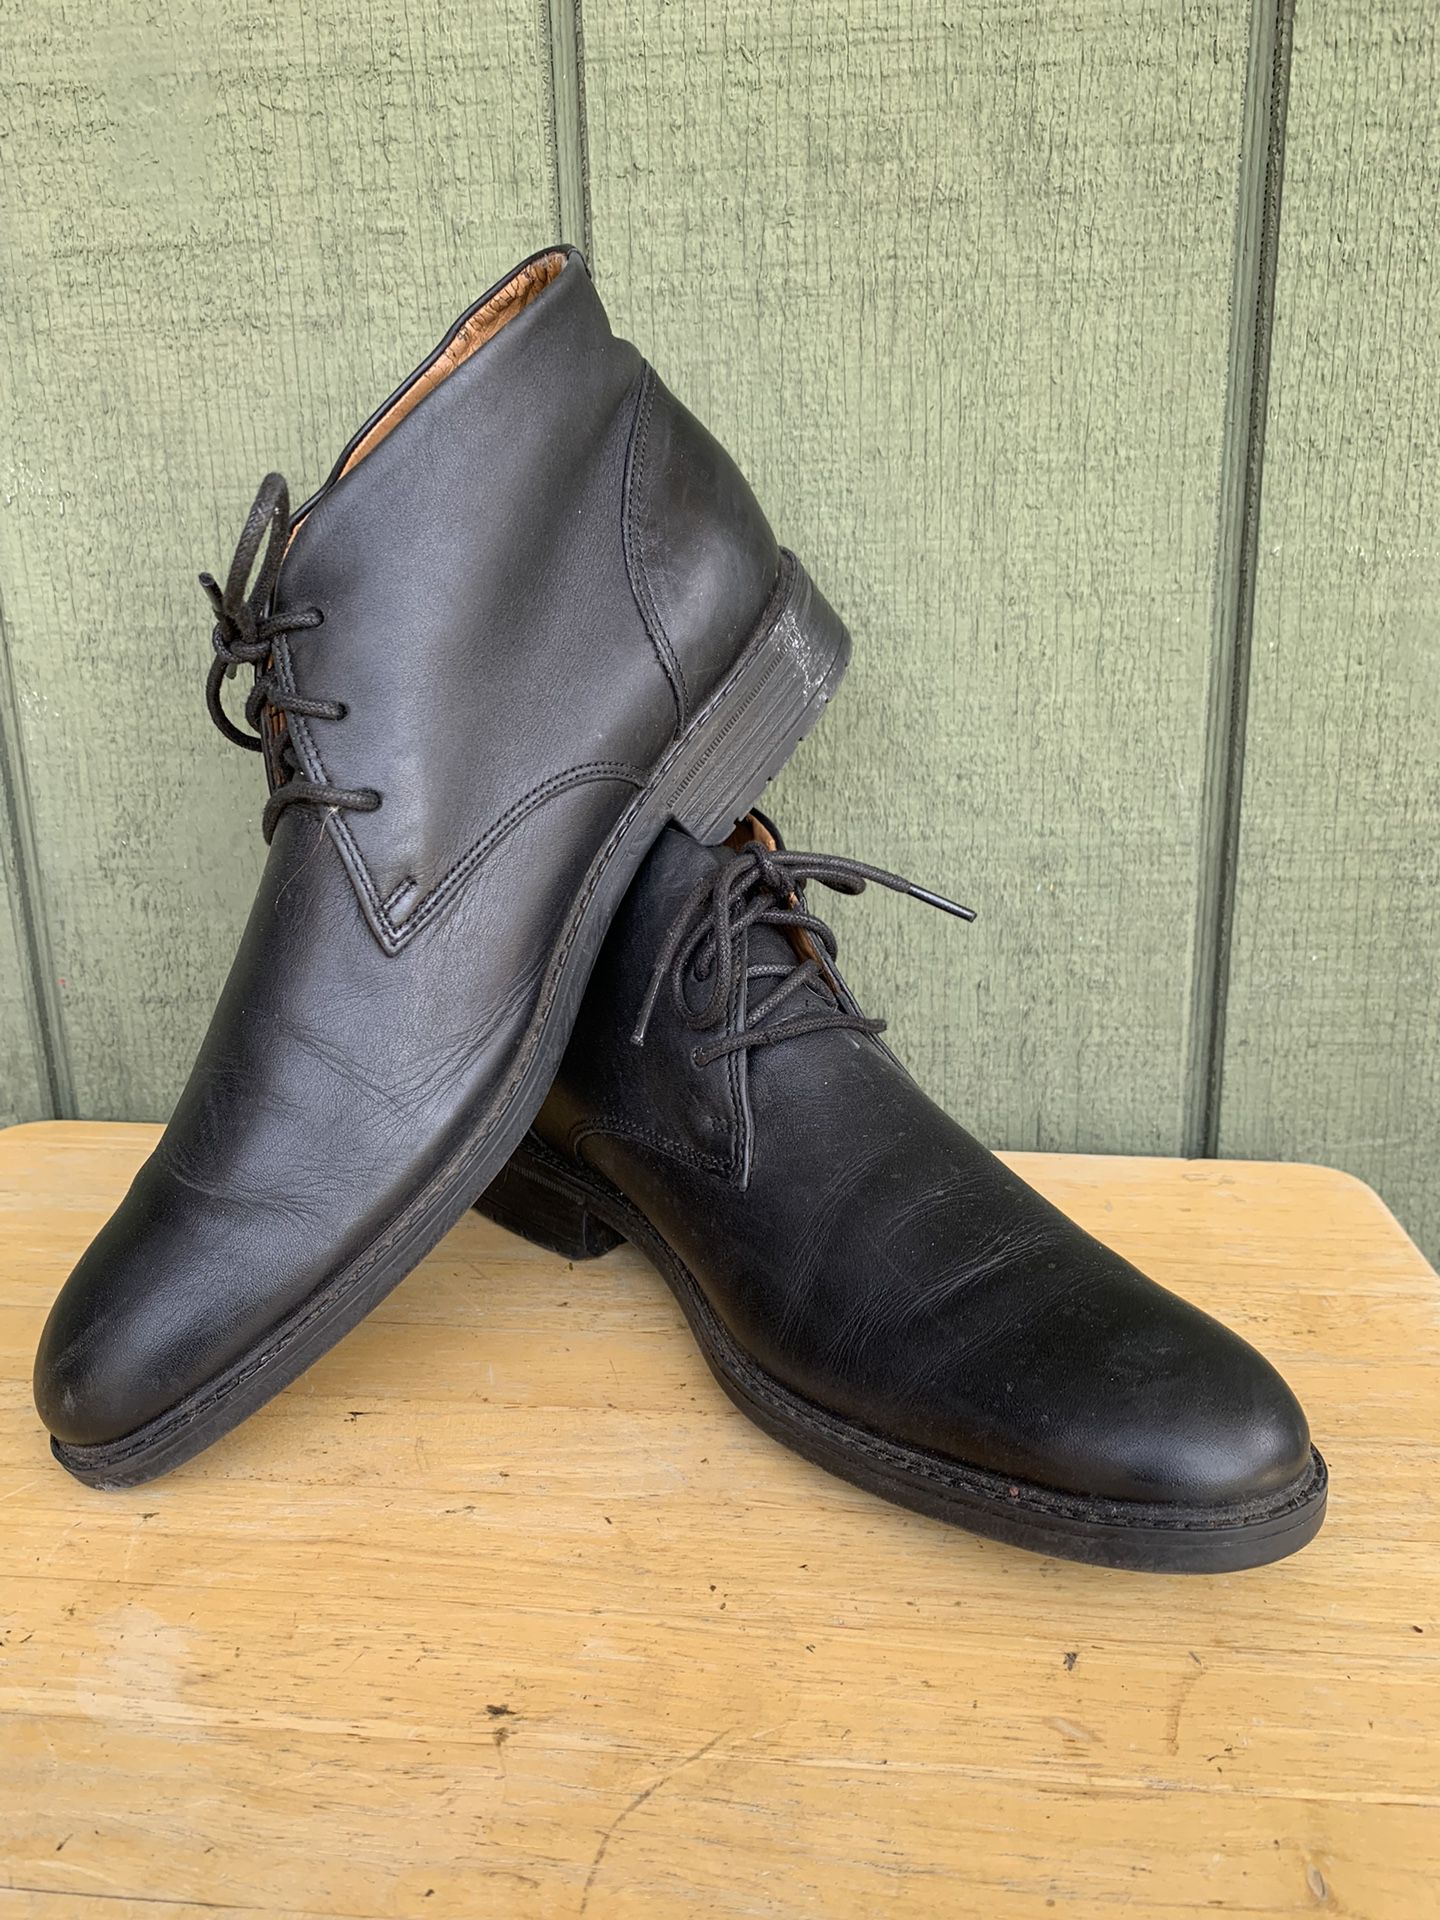 Clarks Chukka Boots Mens 9 M Cushion Plus Black Leather Ankle Shoes Booties for in West Covina, CA - OfferUp